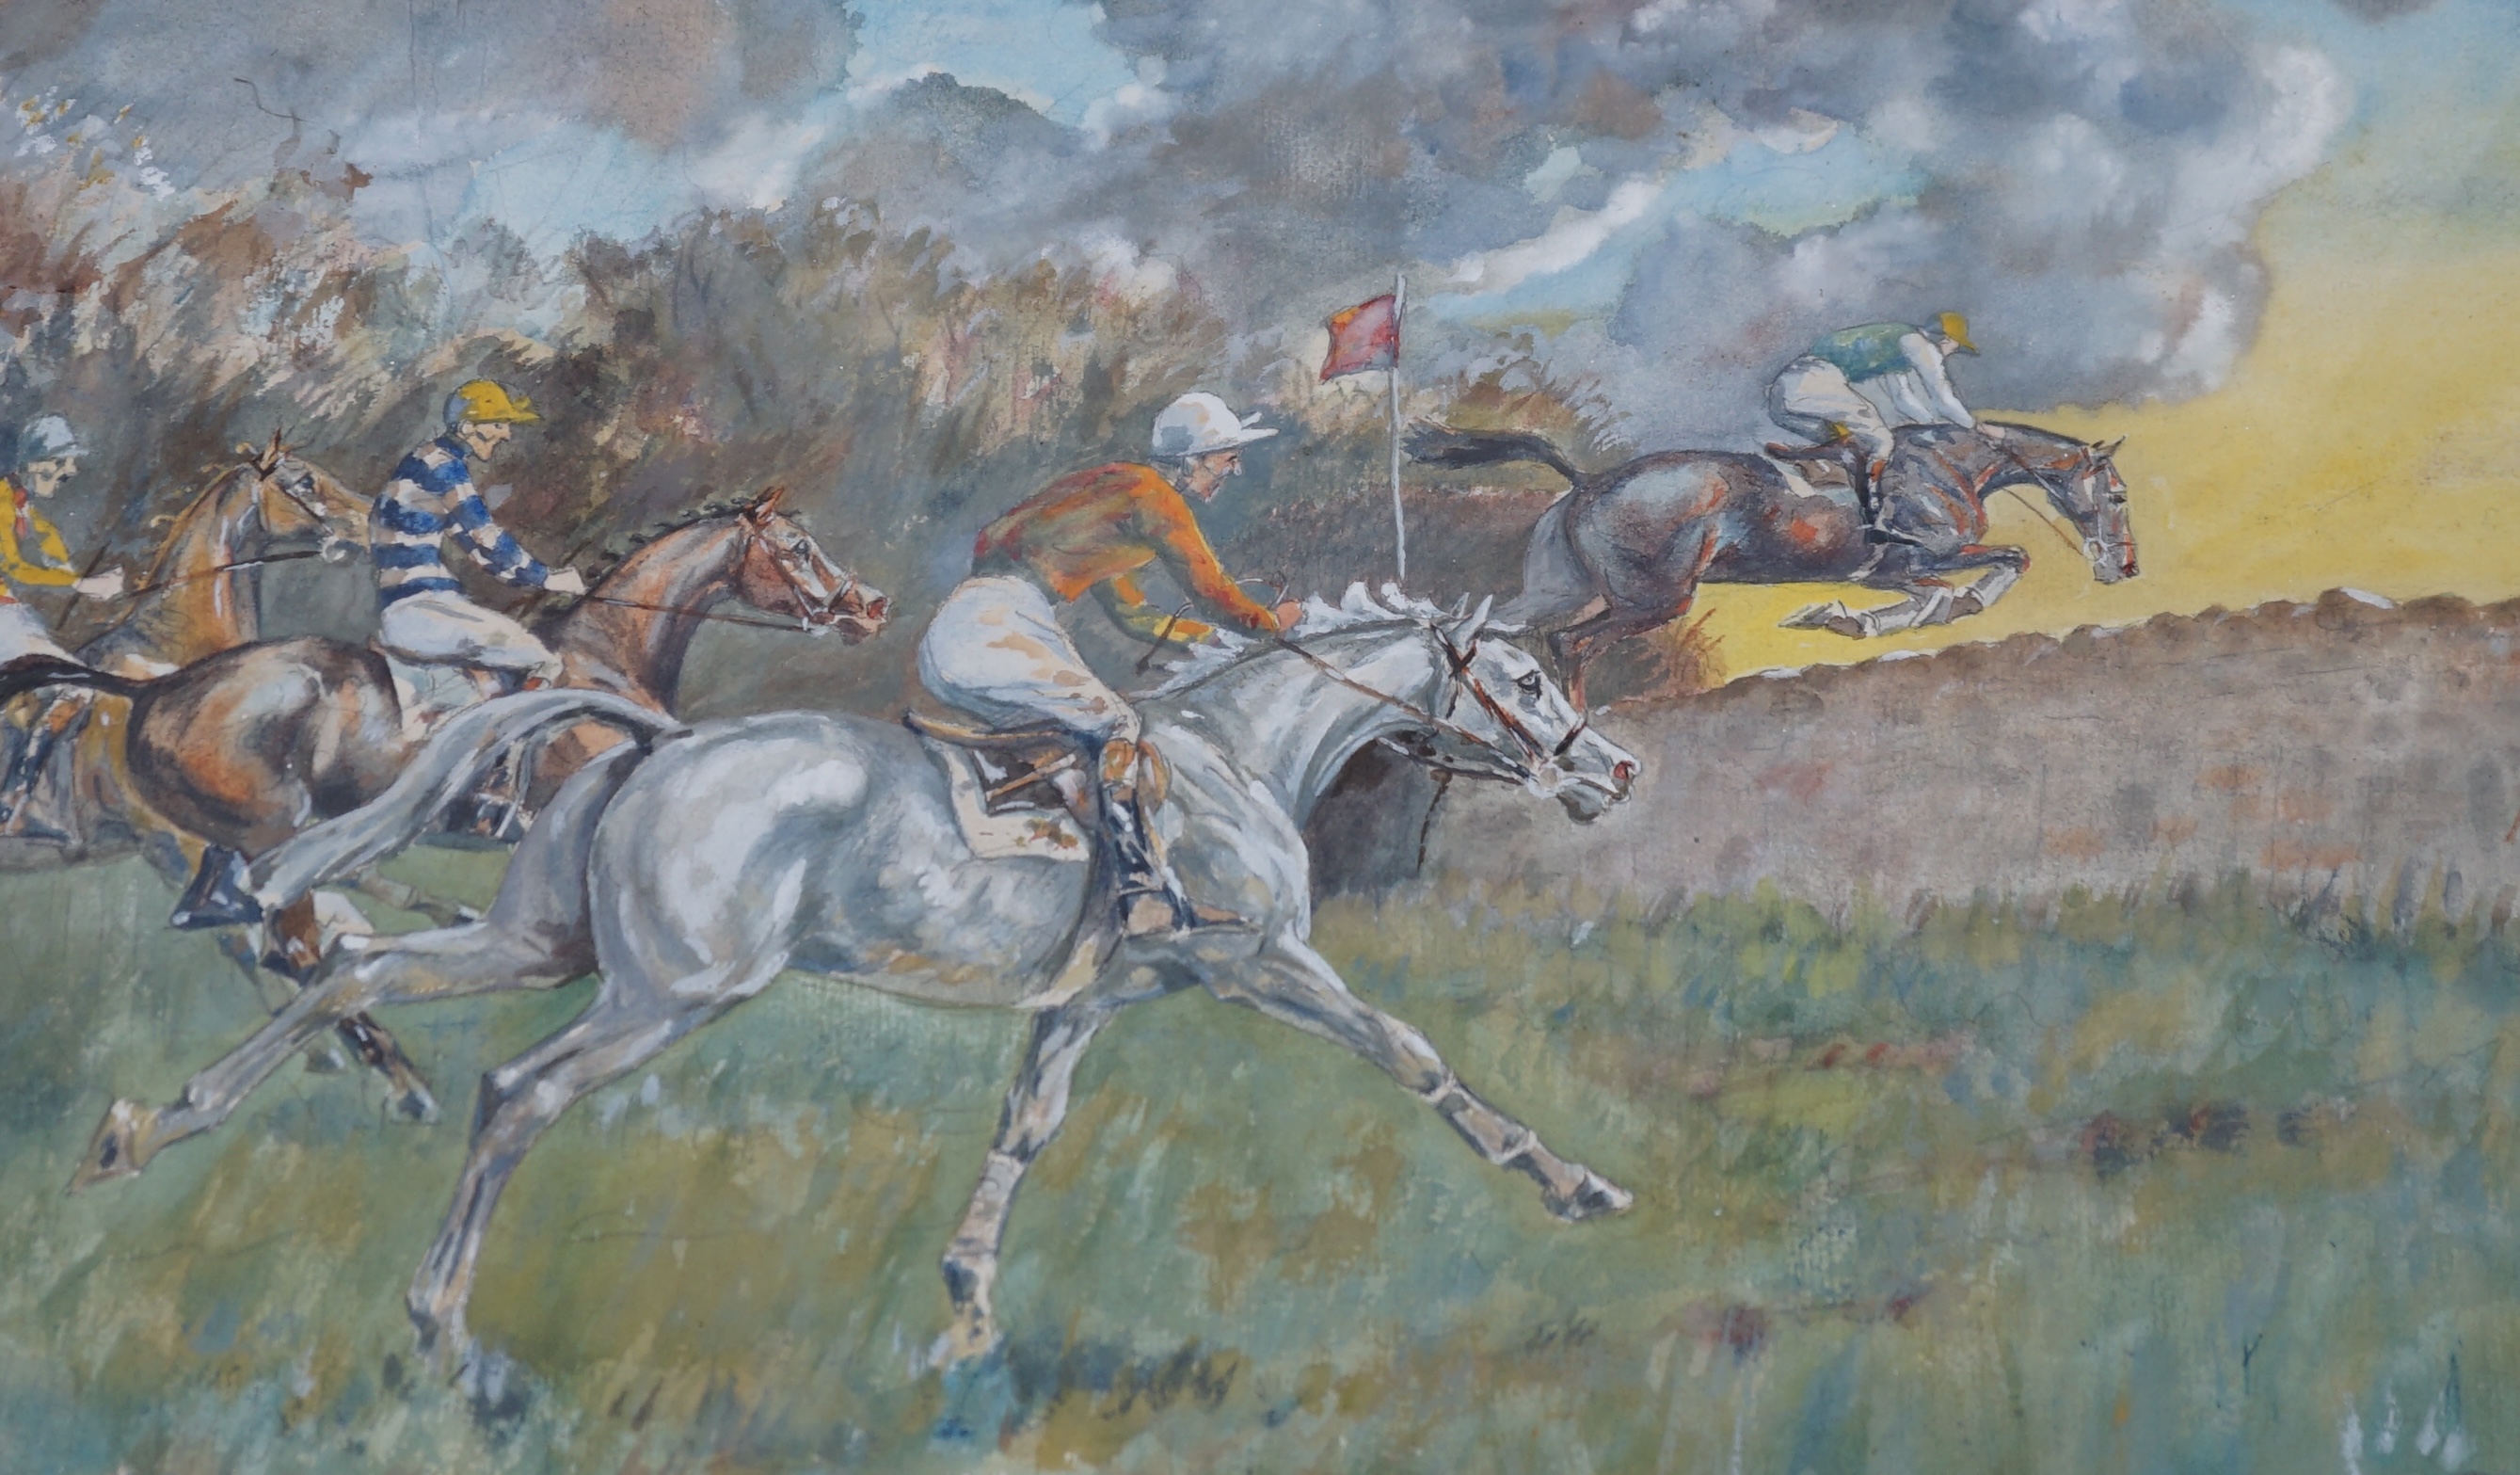 John Broad, watercolour, Steeplechasing, signed, 22 x 35cm, gilt framed. Condition - fair, rippling to the paper